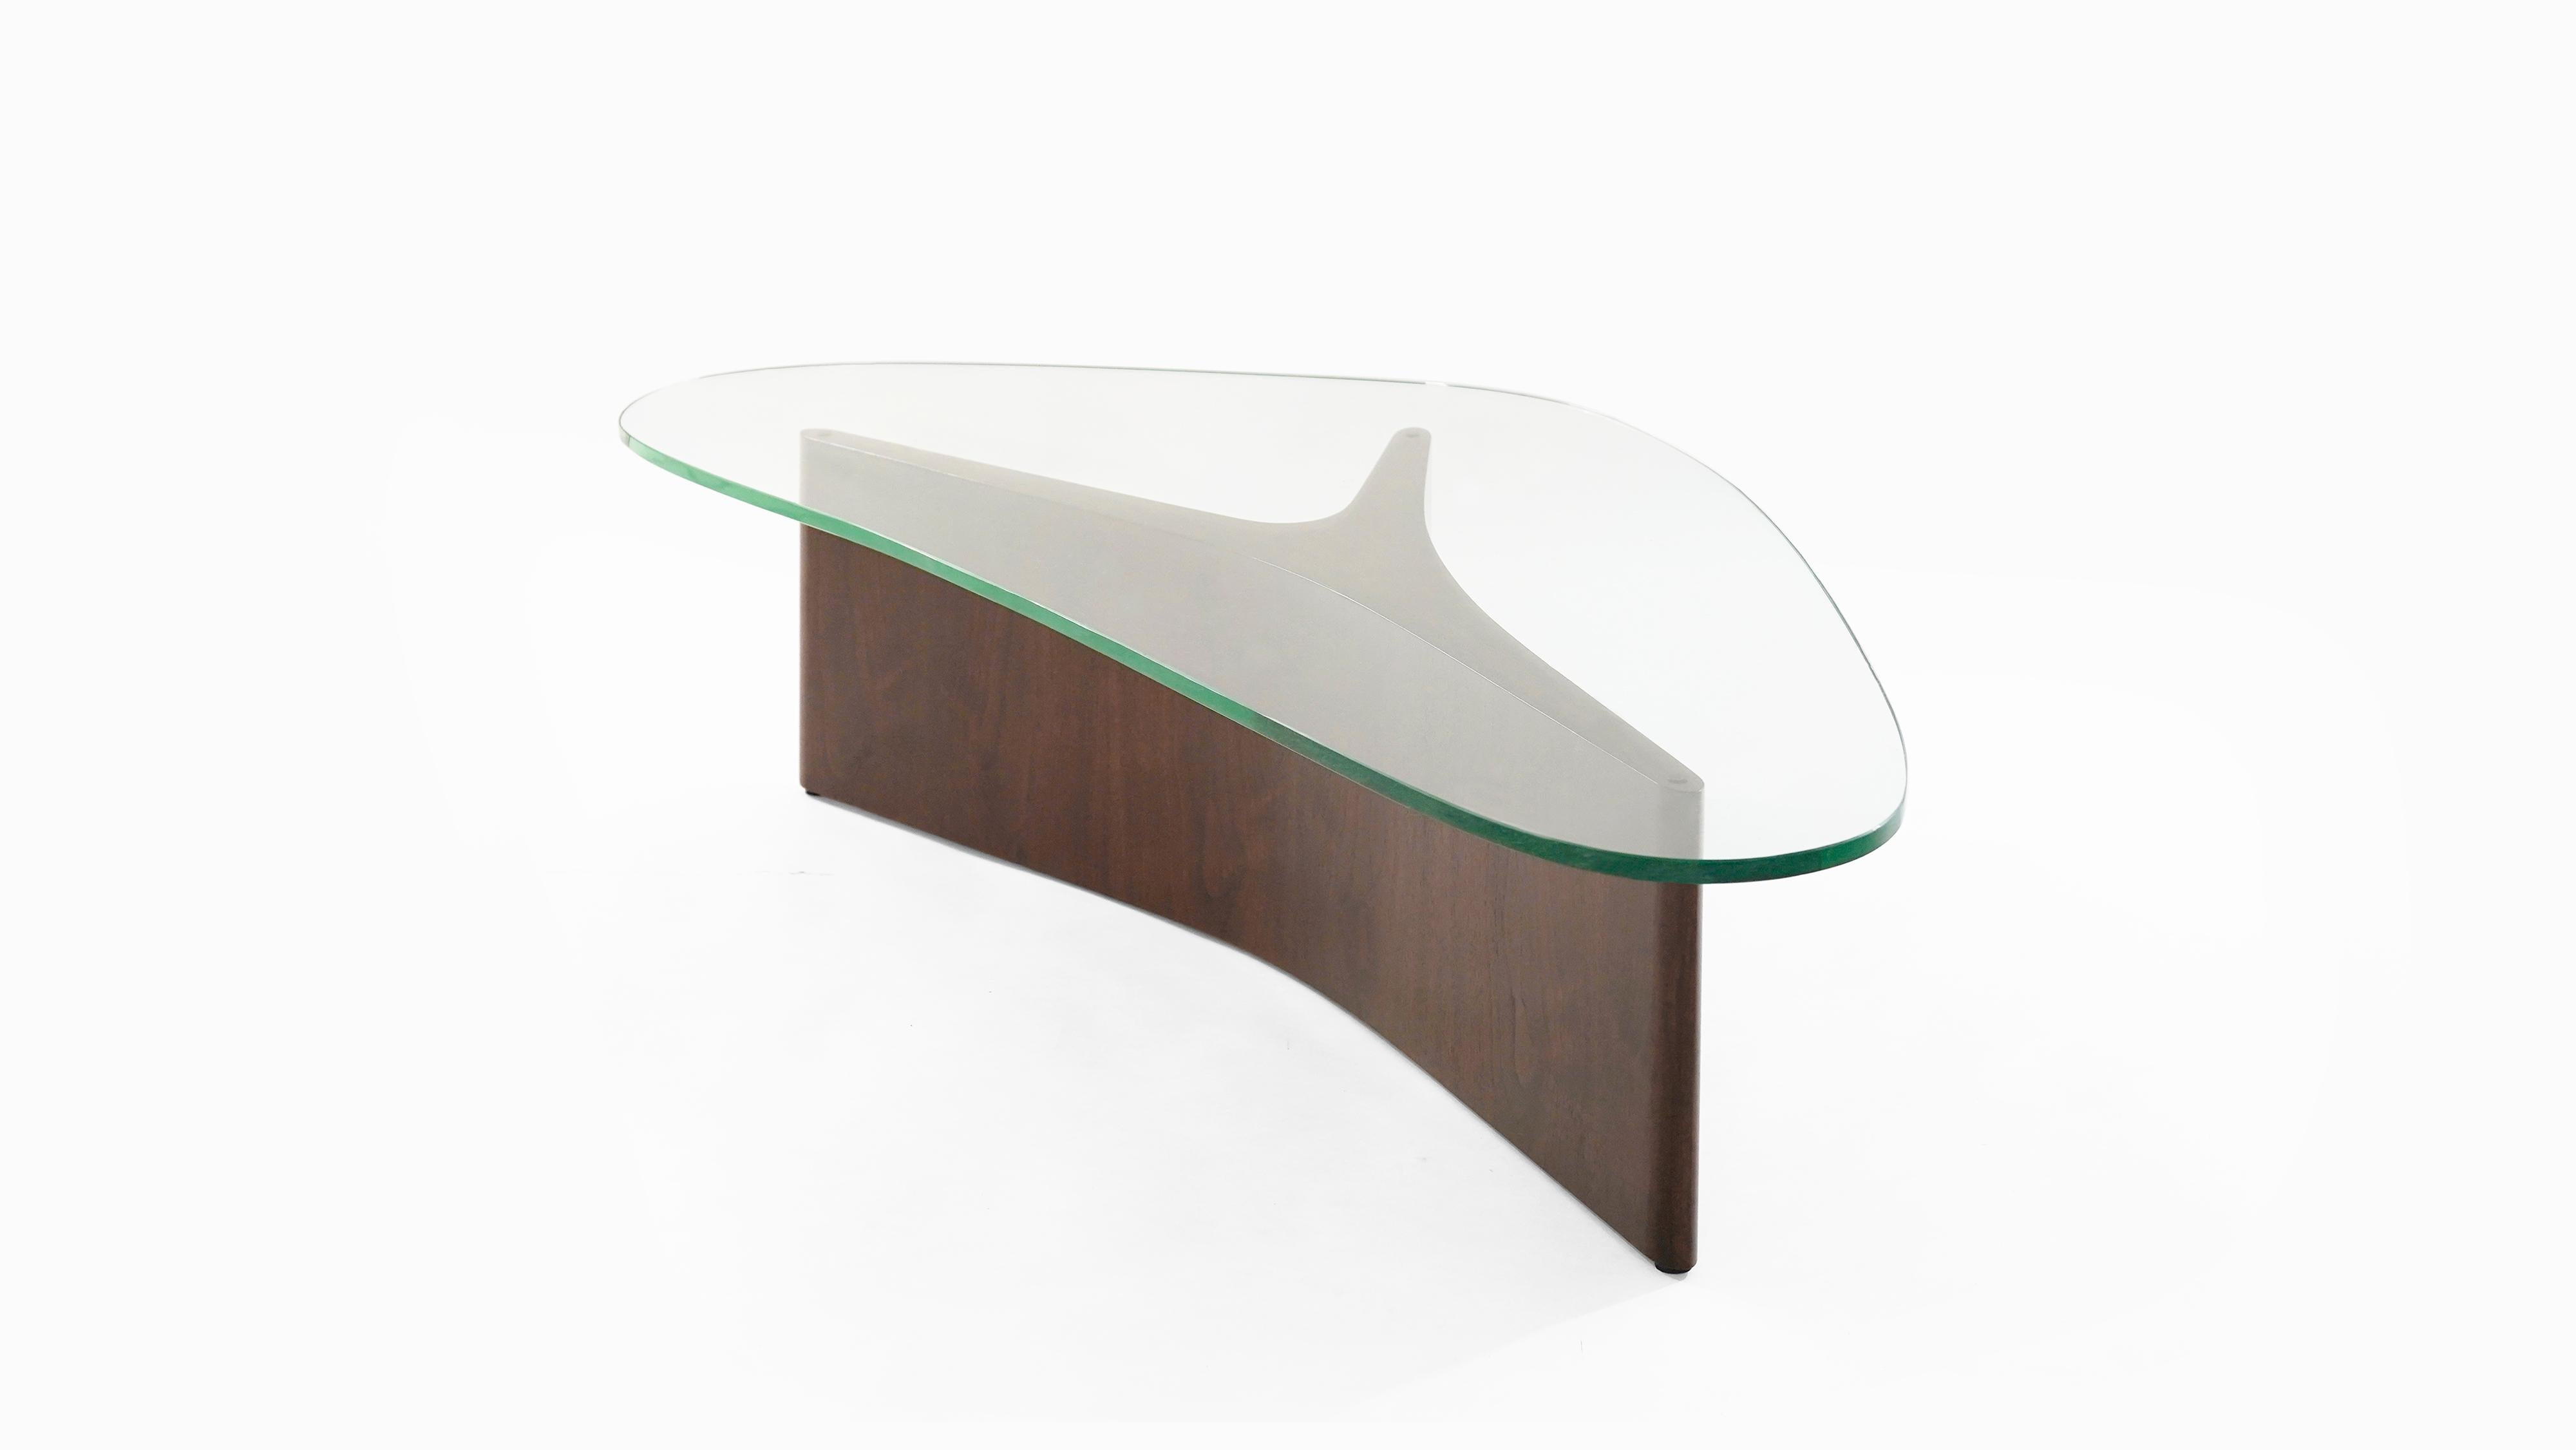 Sculptural coffee table executed in walnut. An early designed by Vladimir Kagan for Kagan-Dreyfuss, Inc., circa 1950s. Walnut fully restored, new glass top matching the shape of the original. Stamped underneath.